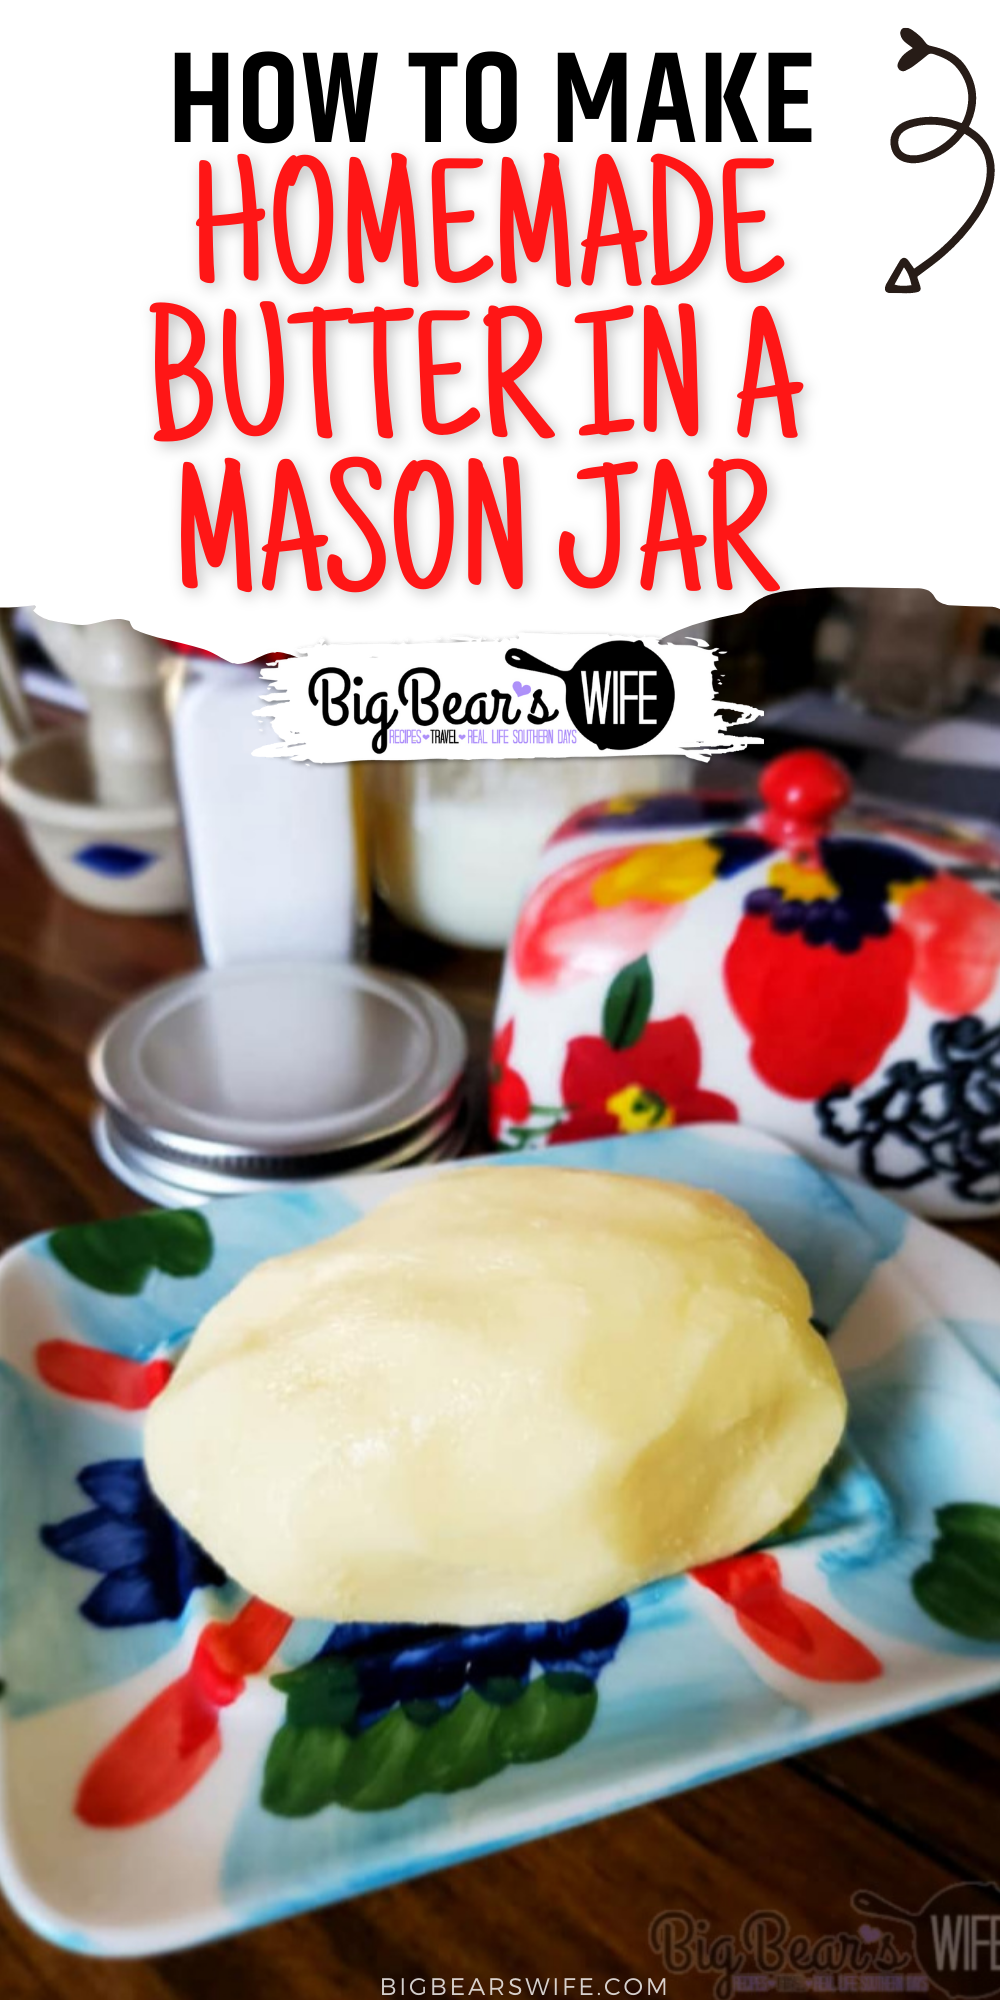 Did you know that you can make homemade butter in a mason jar mason jar? All you need is a mason jar, some heavy cream and salt to make homemade butter!

 via @bigbearswife